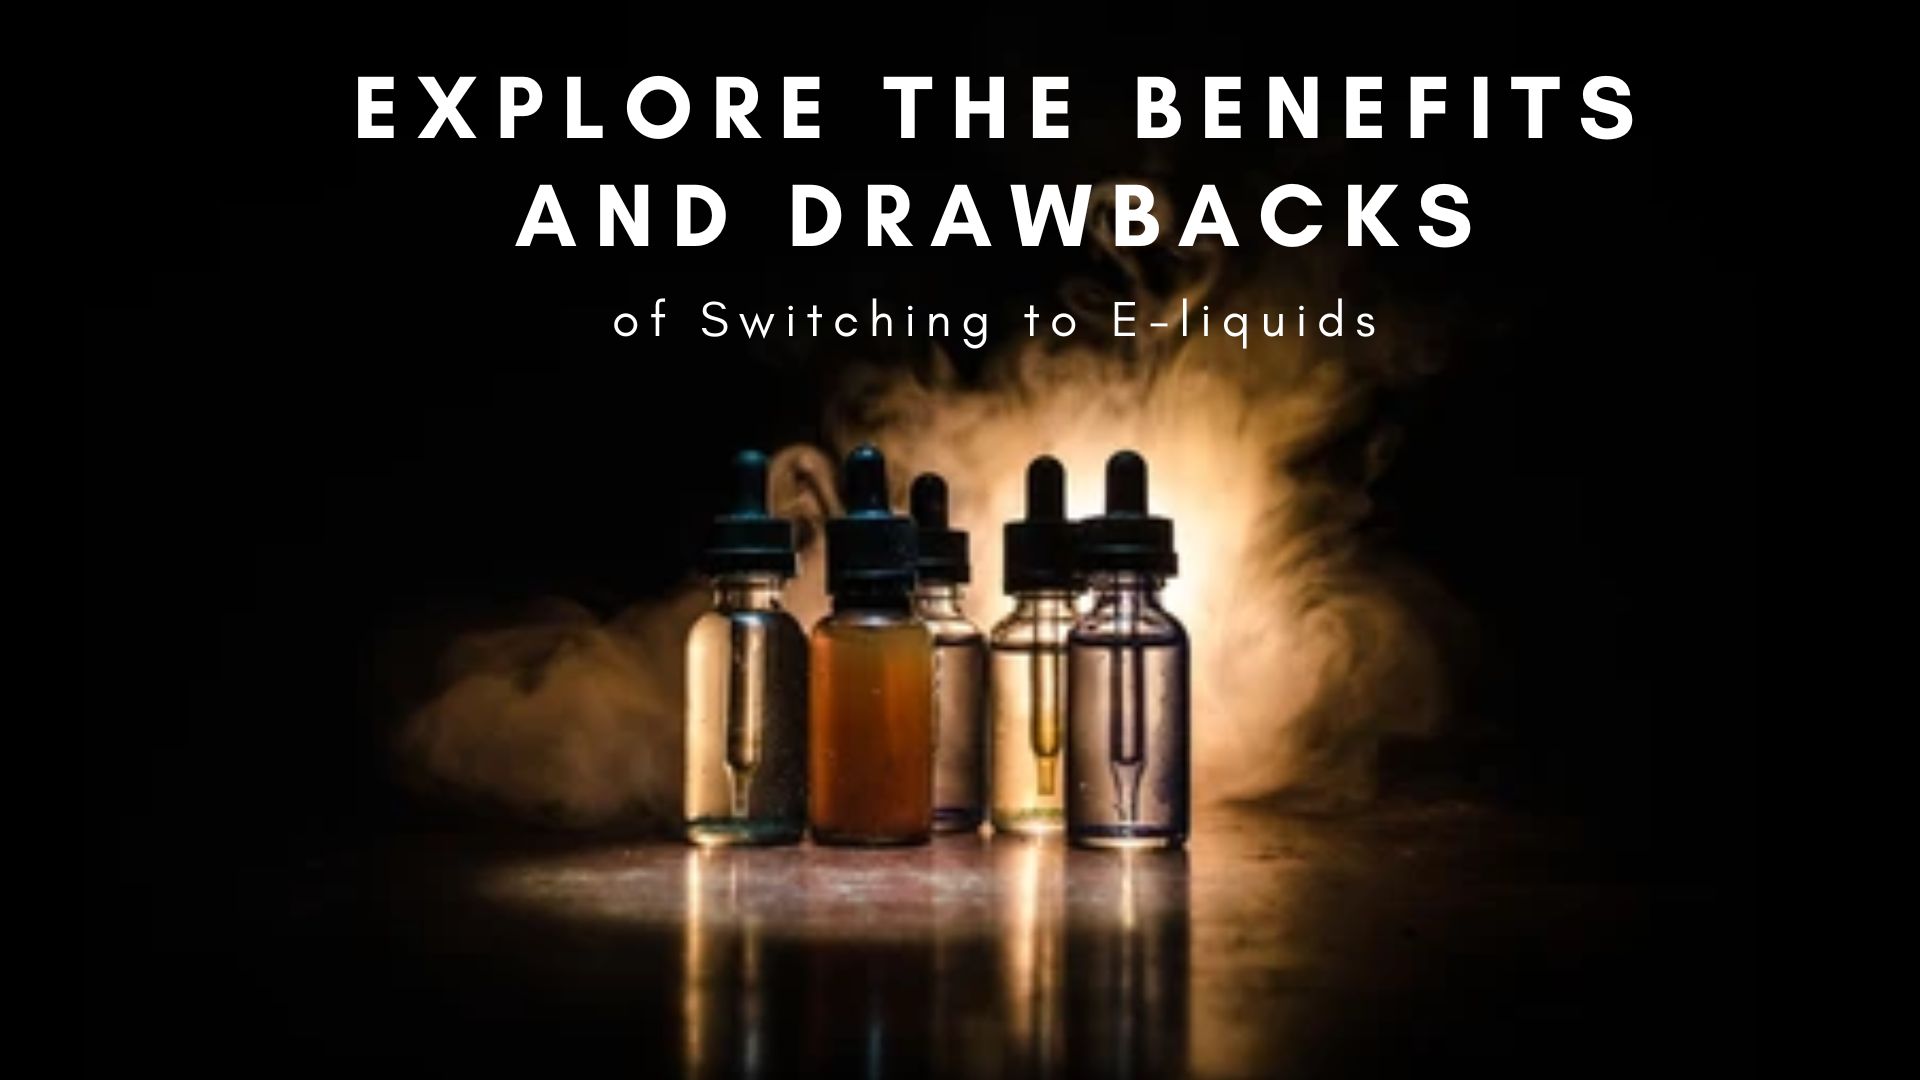 Explore the Benefits and Drawbacks of Switching to E-liquids